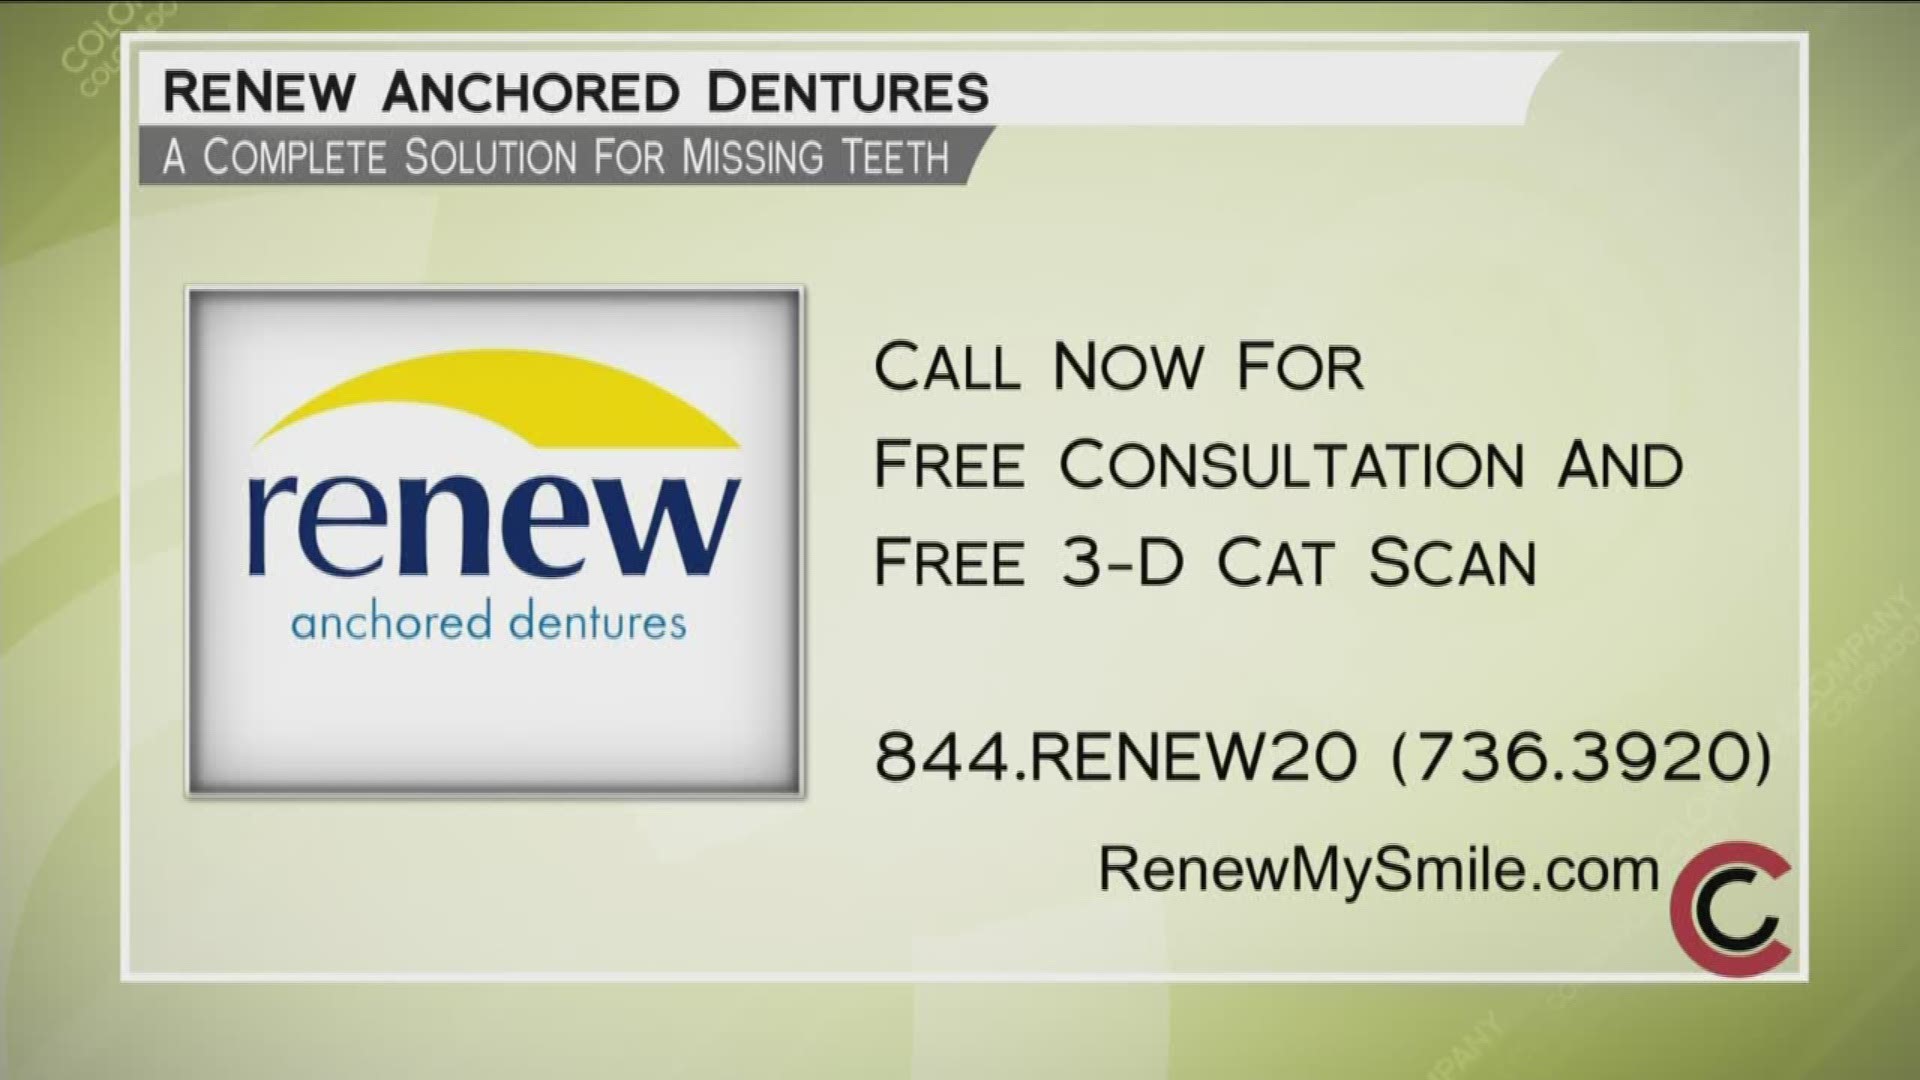 Call 844.736.3920 or visit RenewMySmile.com to schedule your free consultation and get that smile you've always wanted.